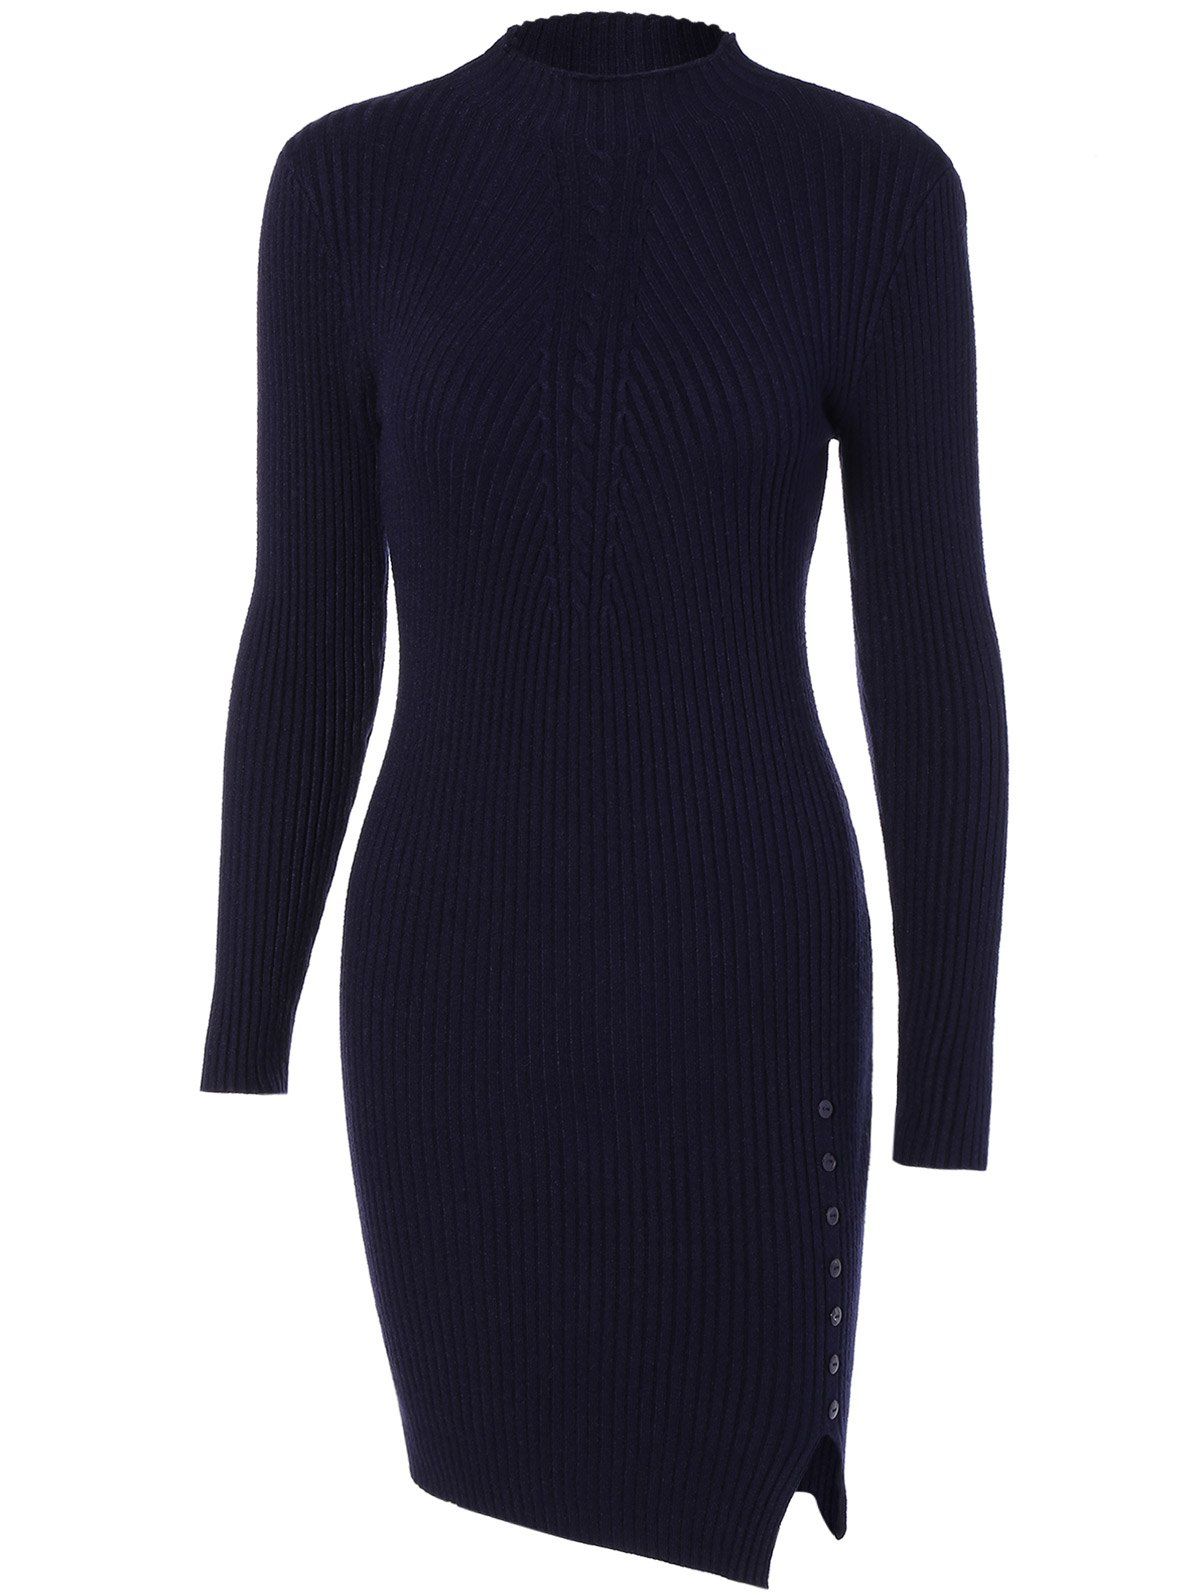 Long Sleeve Crew Neck Bodycon Sweater Dress, BLACK, ONE SIZE in Sweater ...